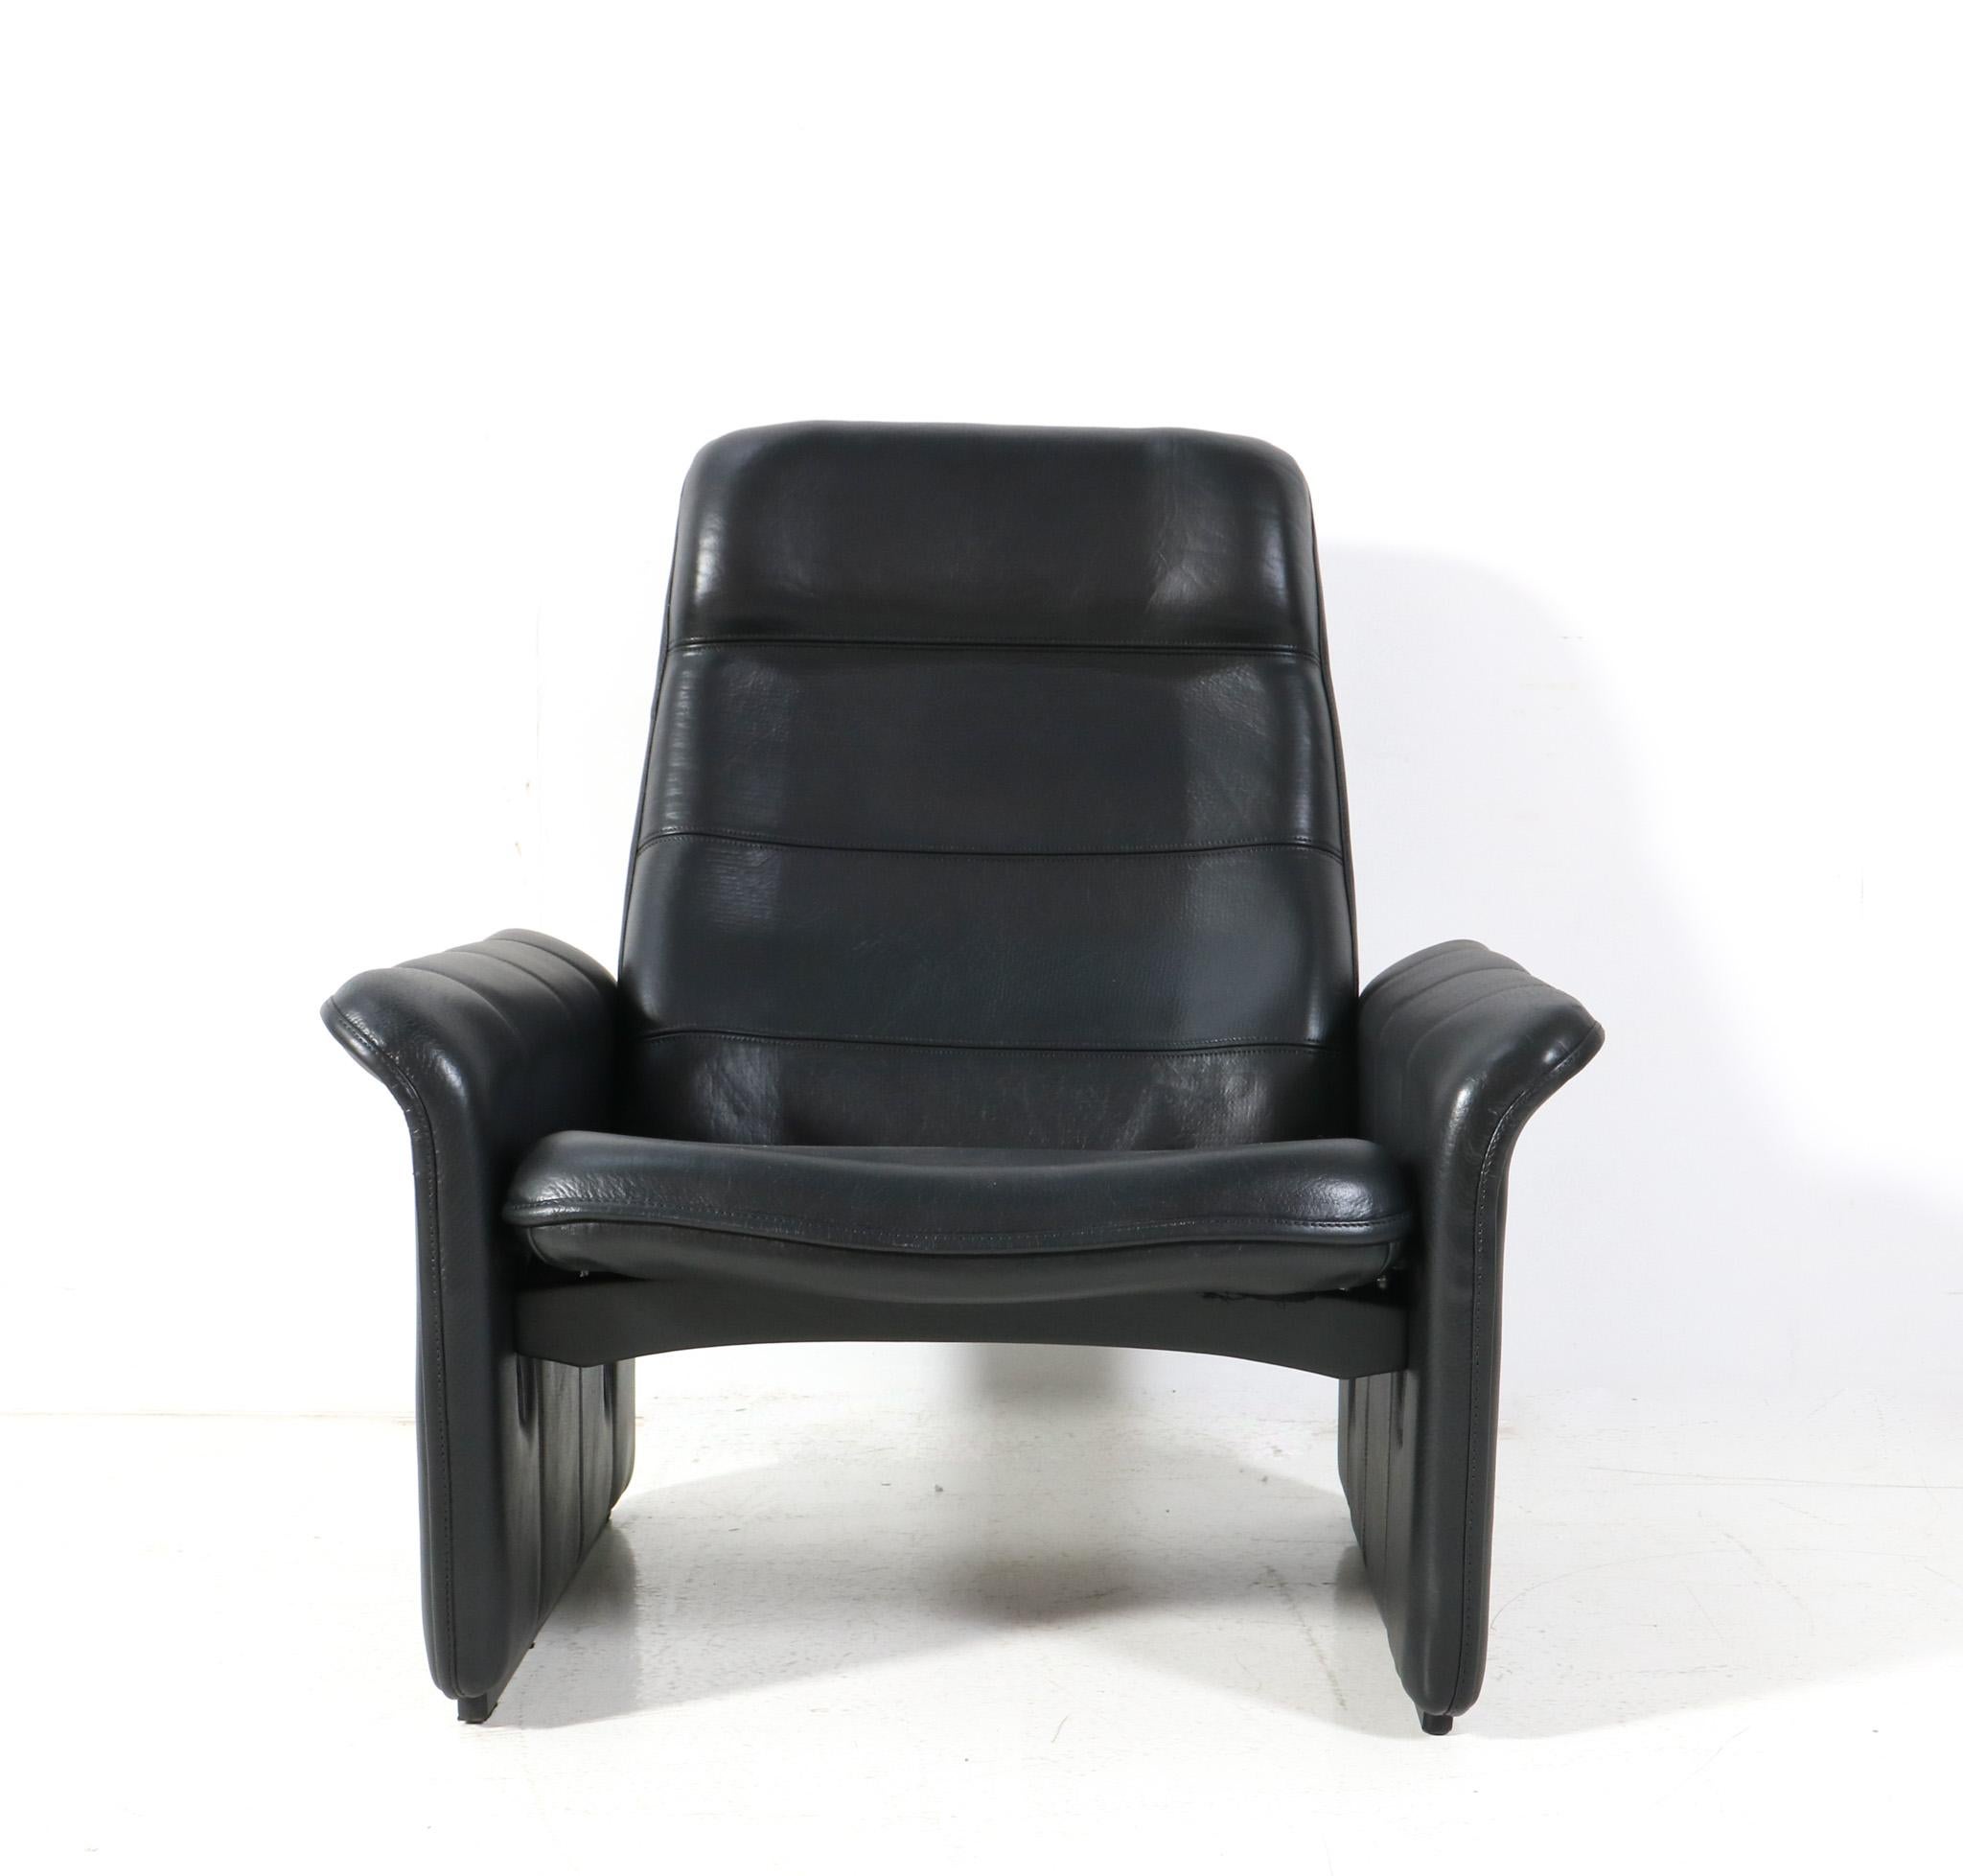 Pair of Buffalo Neck Leather DS-50 Lounge Chairs and Ottoman by De Sede, 1970s For Sale 2